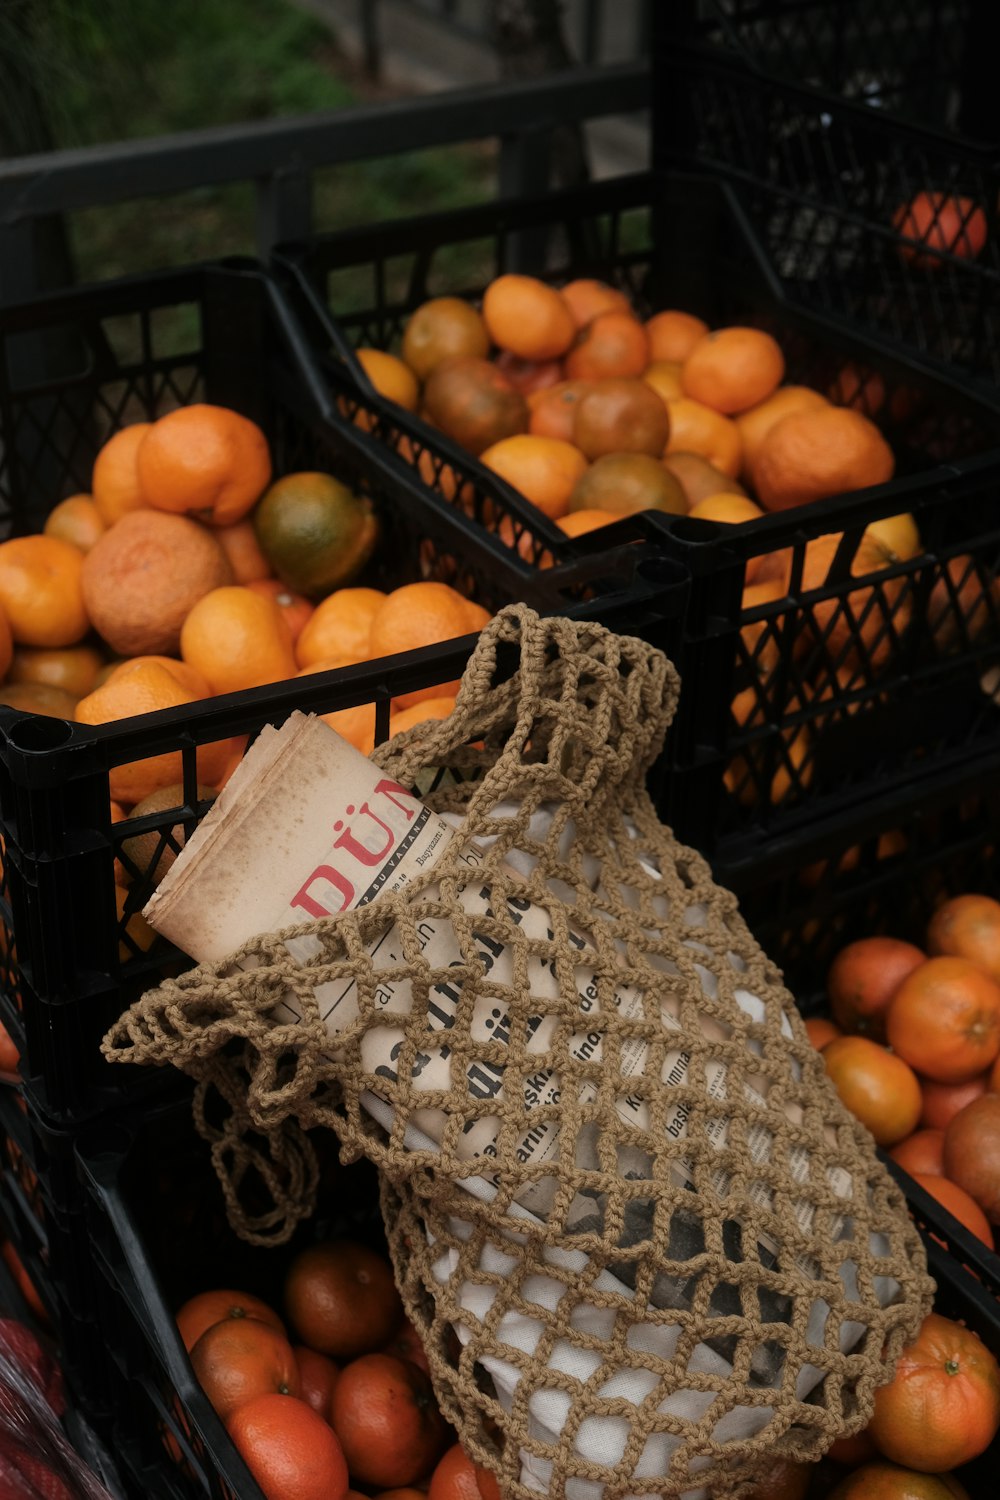 a couple of baskets filled with oranges next to each other